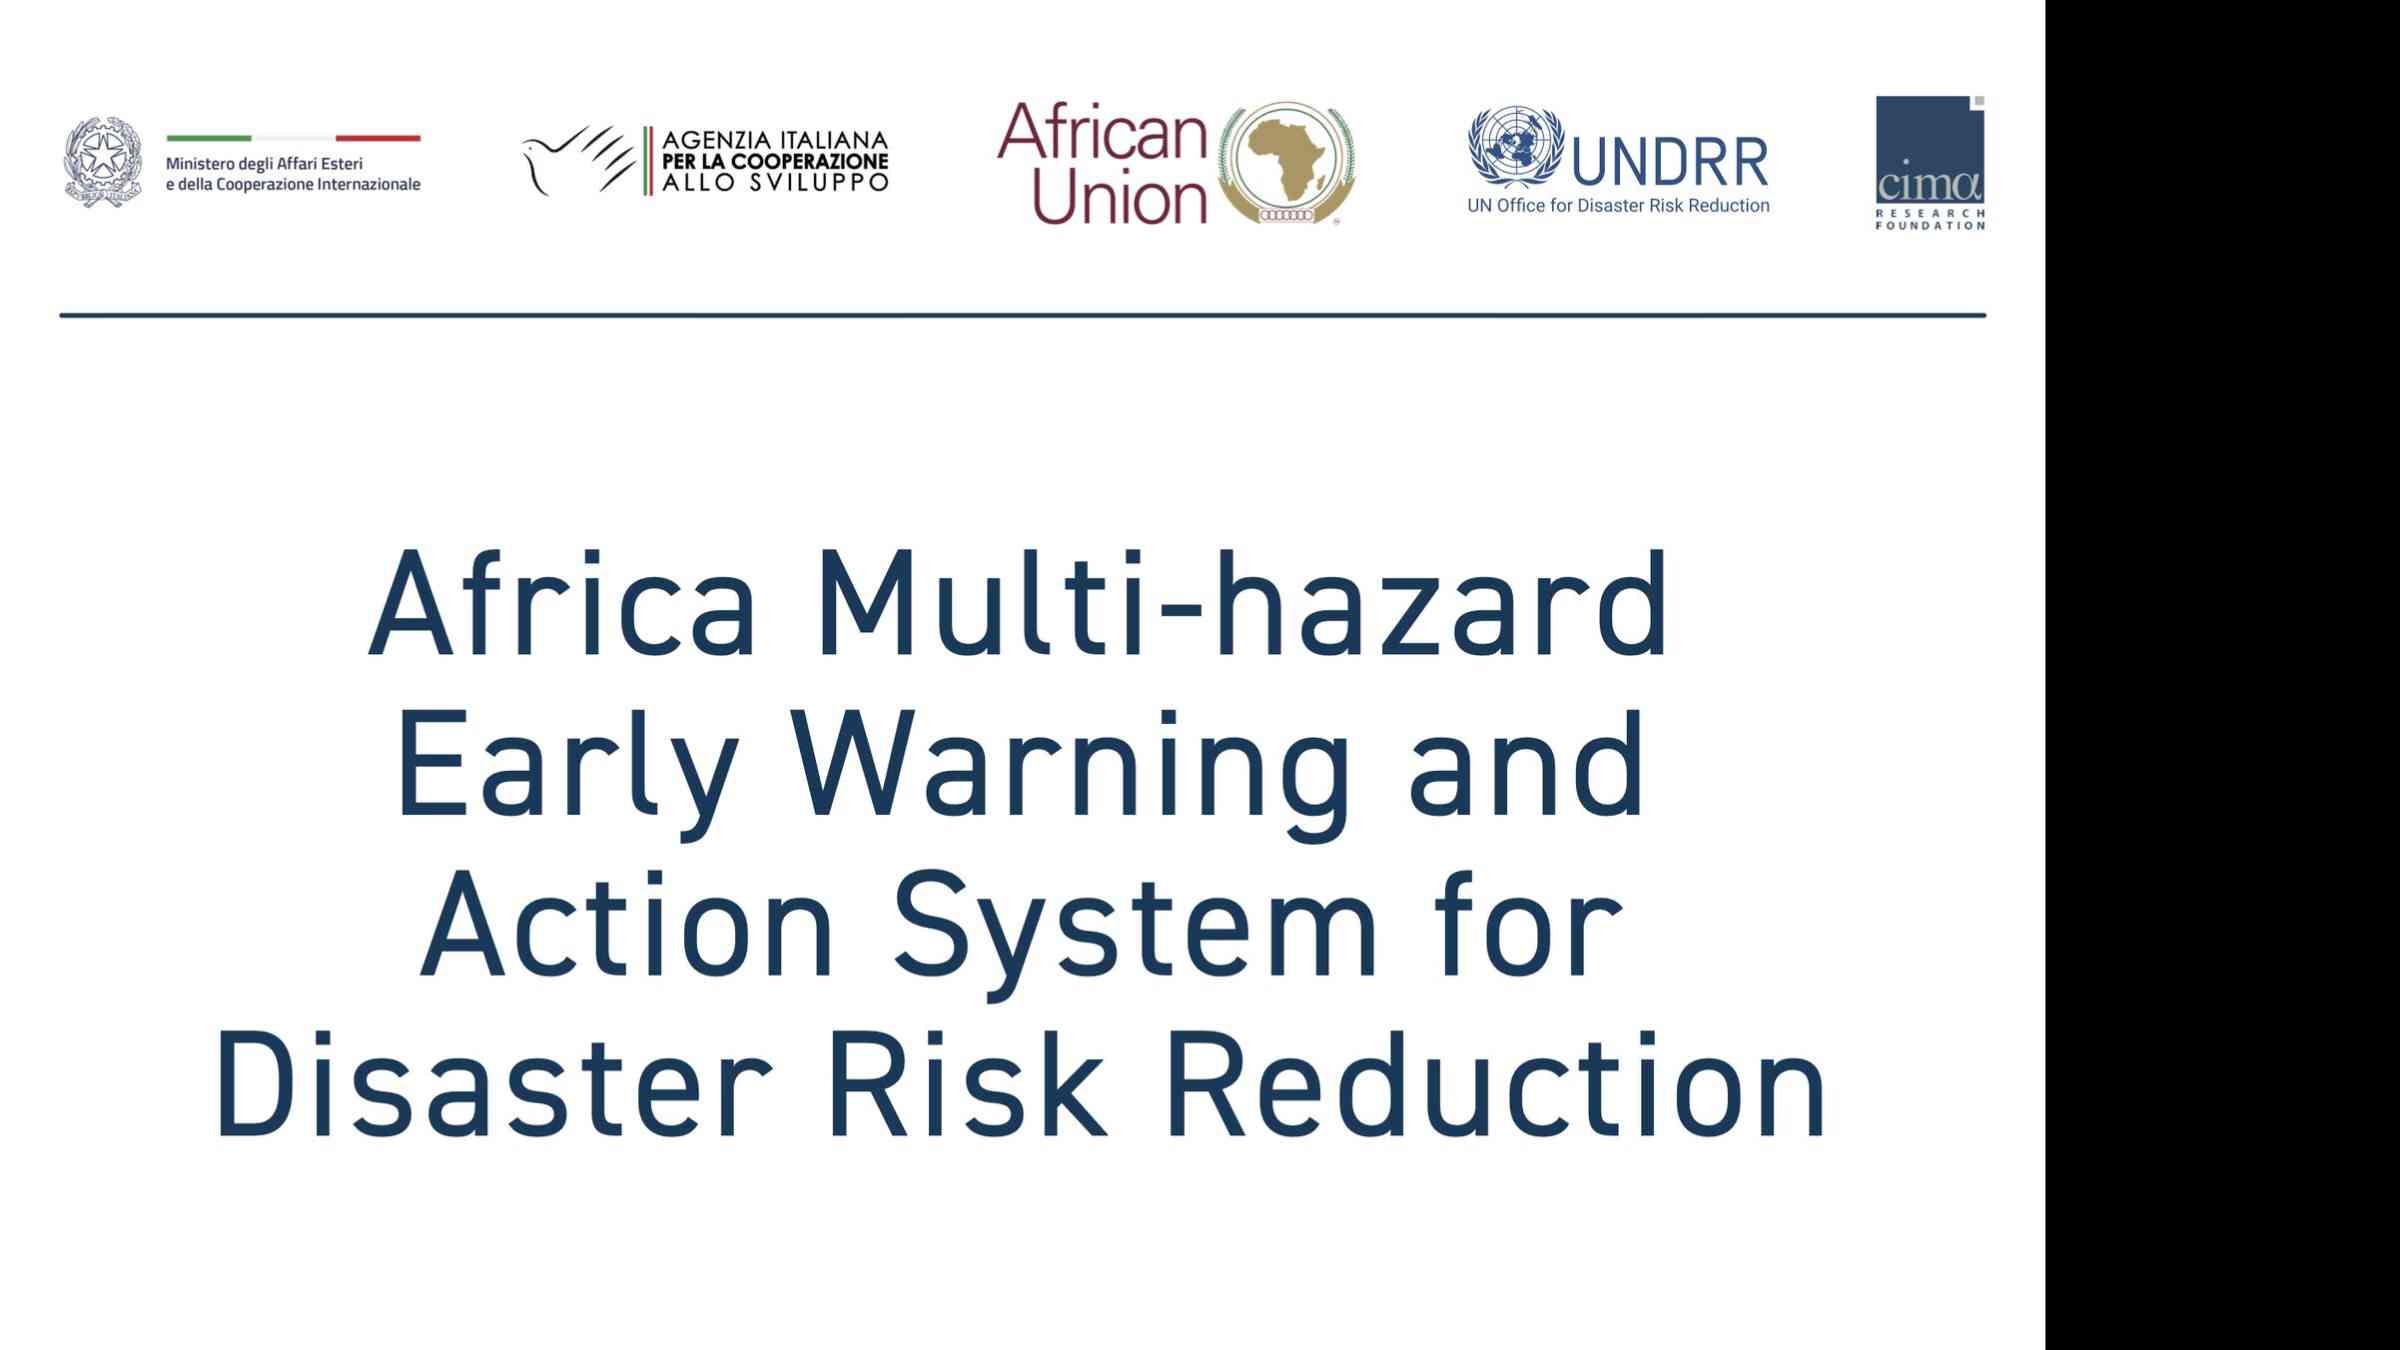 Africa Multi-hazard Early Warning and Action System for Disaster Risk Reduction